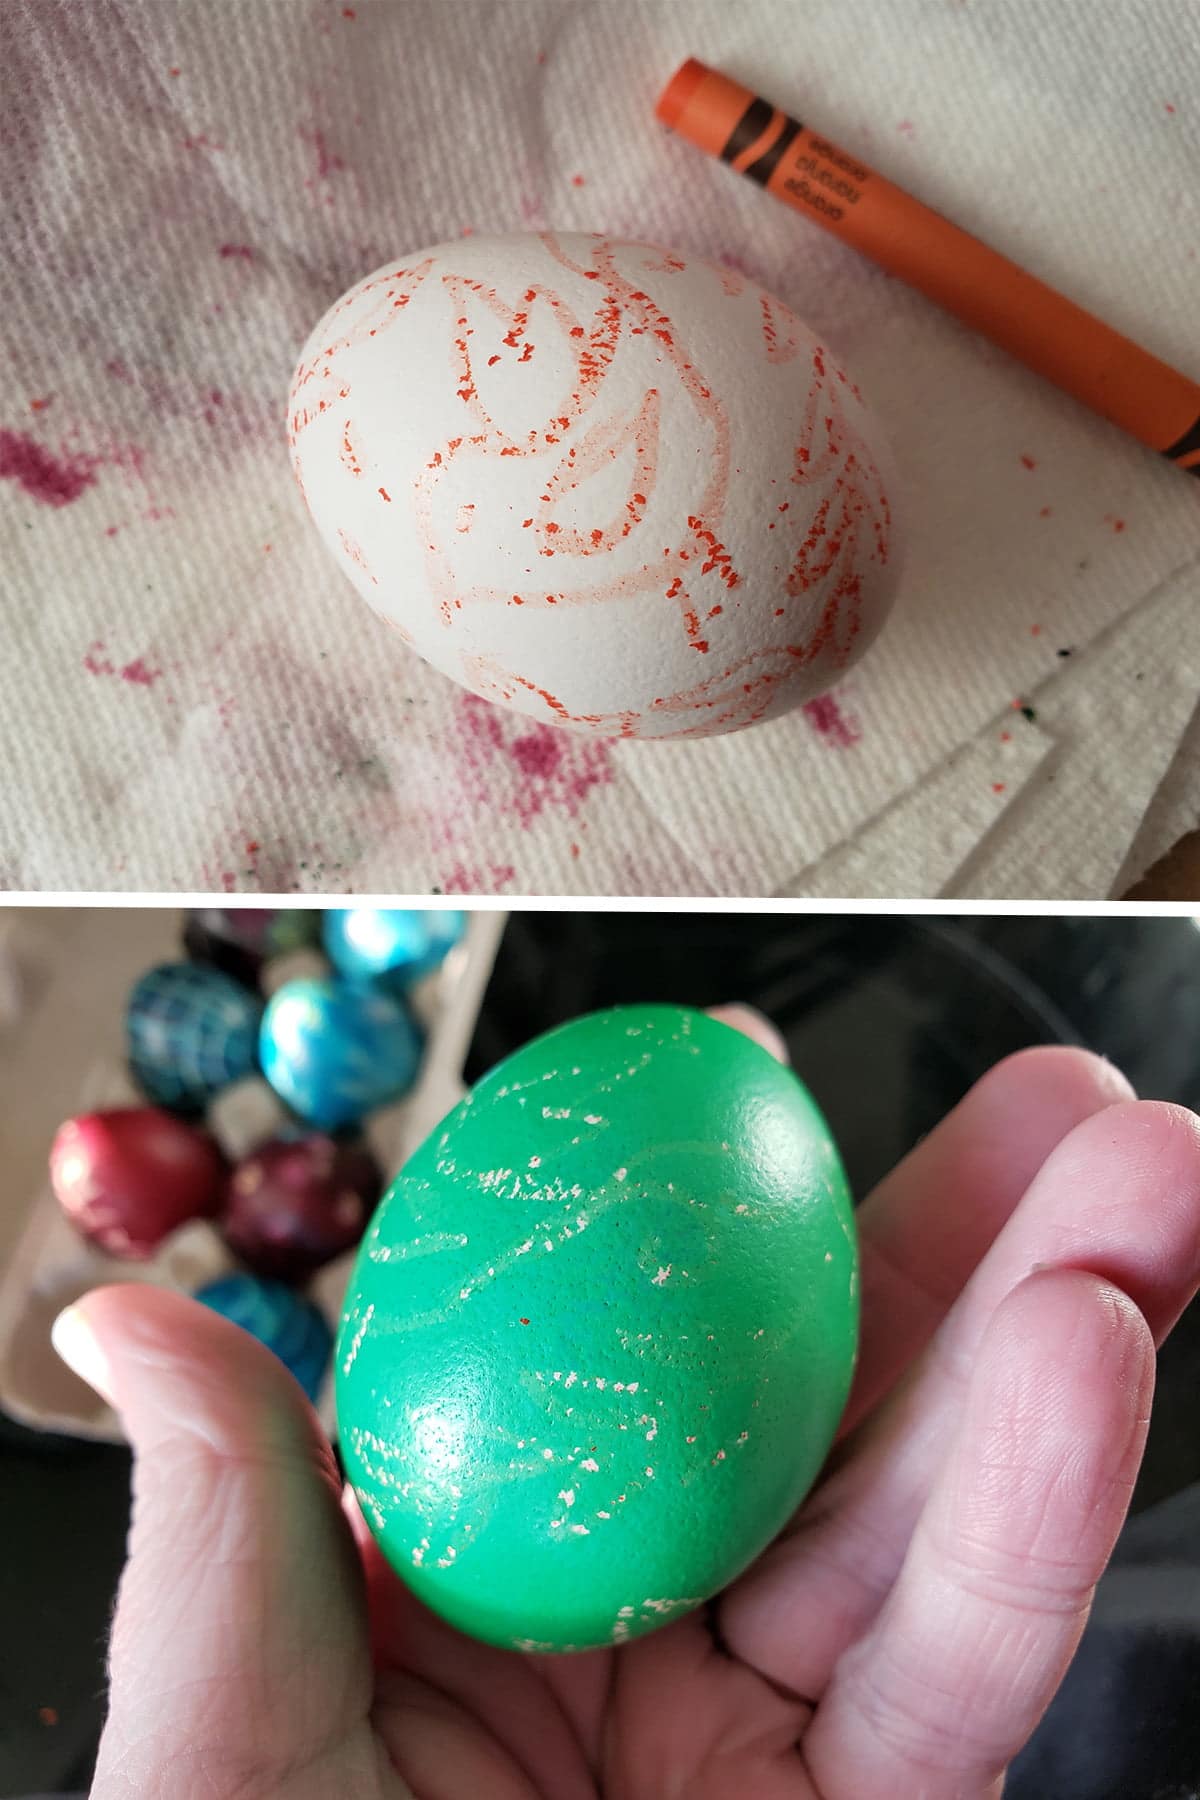 A two part image showing a white egg with orange design drawn onto it in crayon, and a green egg woth barely discernible white design on it.